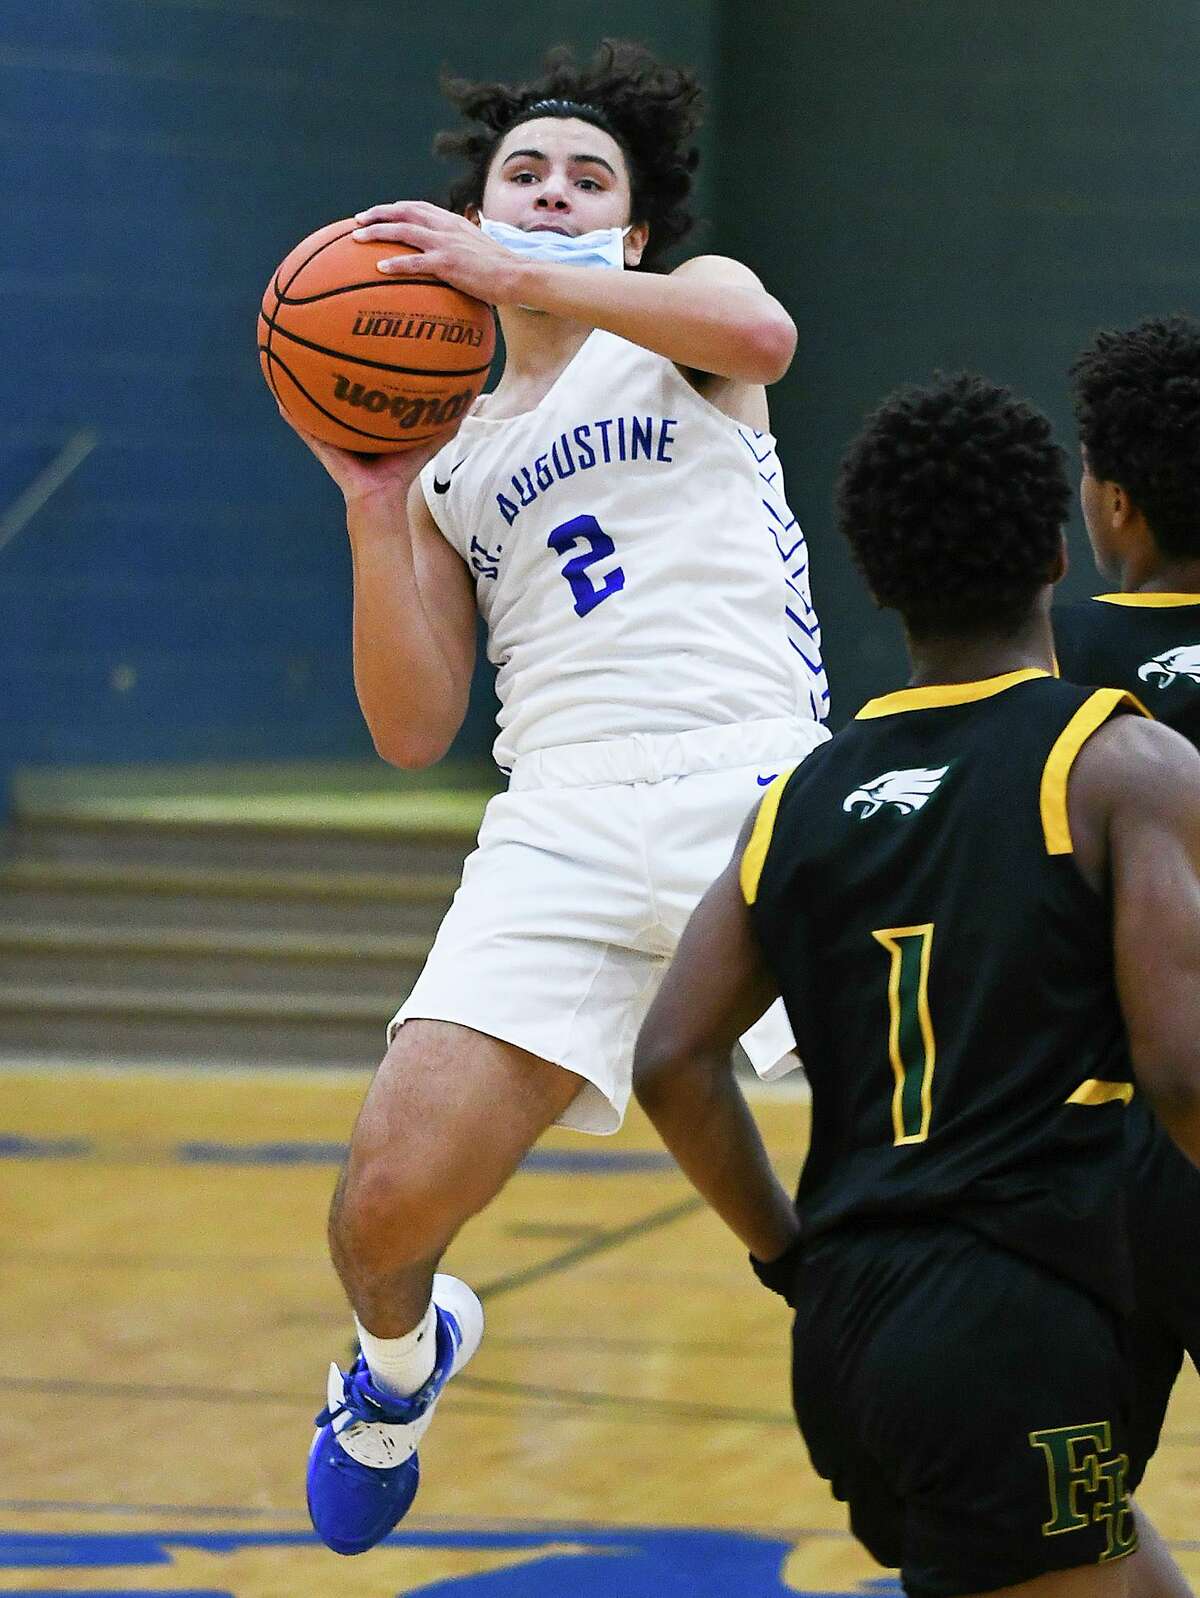 In this file photo, St. Augustine High School’s Diego Romo takes a last-second shot during a game against Fort Bend Christian Academy, Saturday, Feb. 27, 2021, at St. Augustine High School.